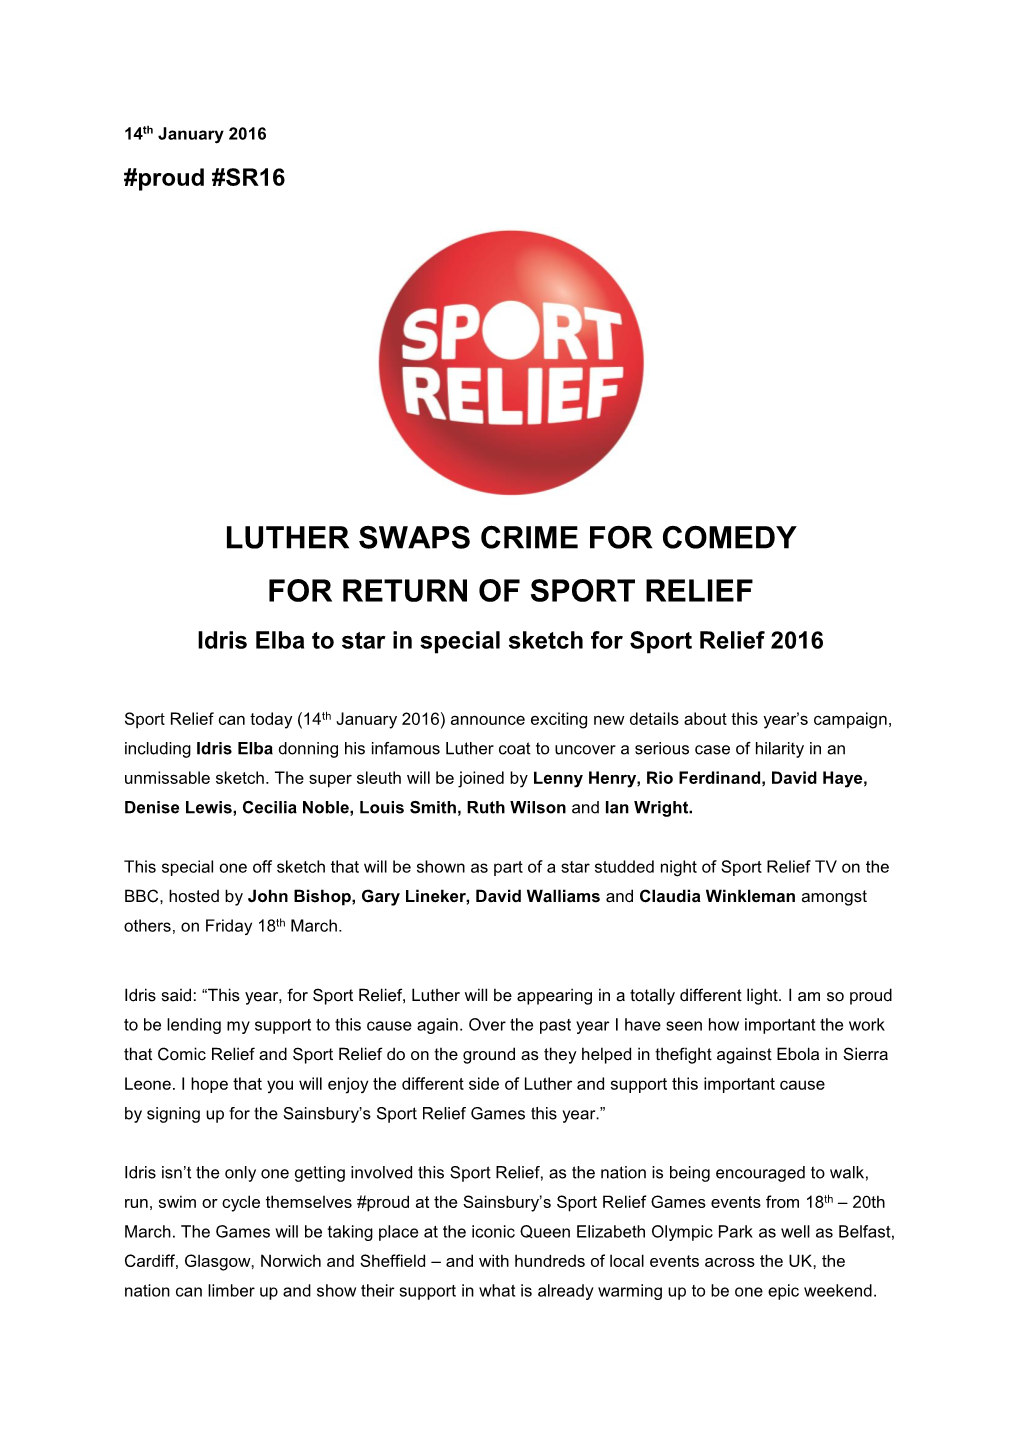 LUTHER SWAPS CRIME for COMEDY for RETURN of SPORT RELIEF Idris Elba to Star in Special Sketch for Sport Relief 2016